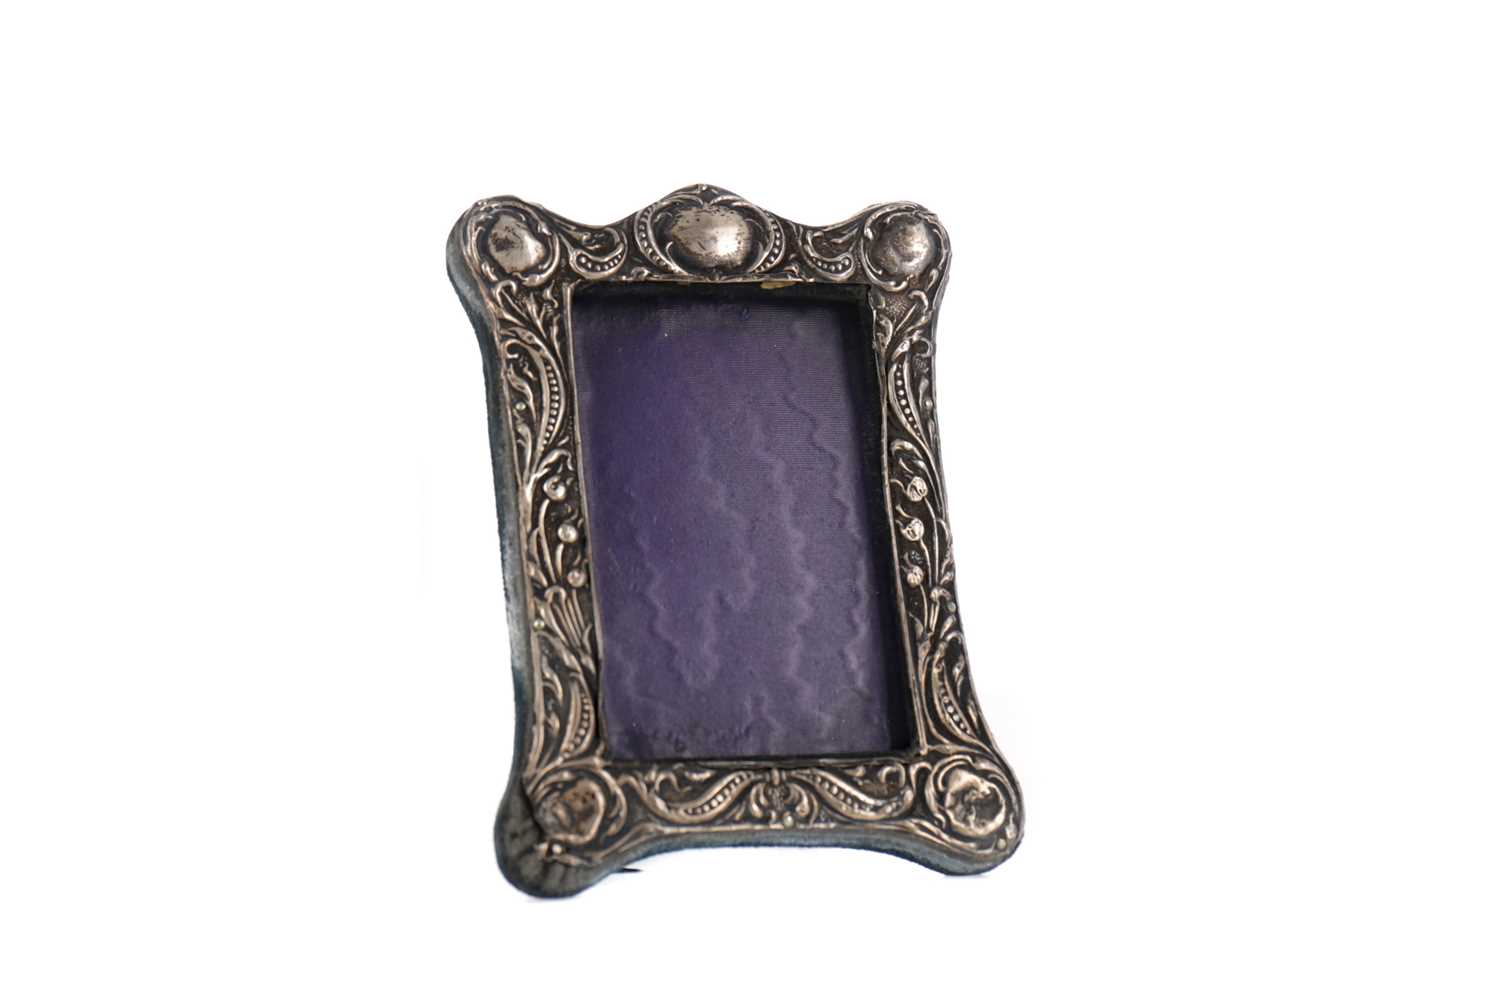 Lot 417 - AN EARLY 20TH CENTURY SILVER PHOTOGRAPH FRAME